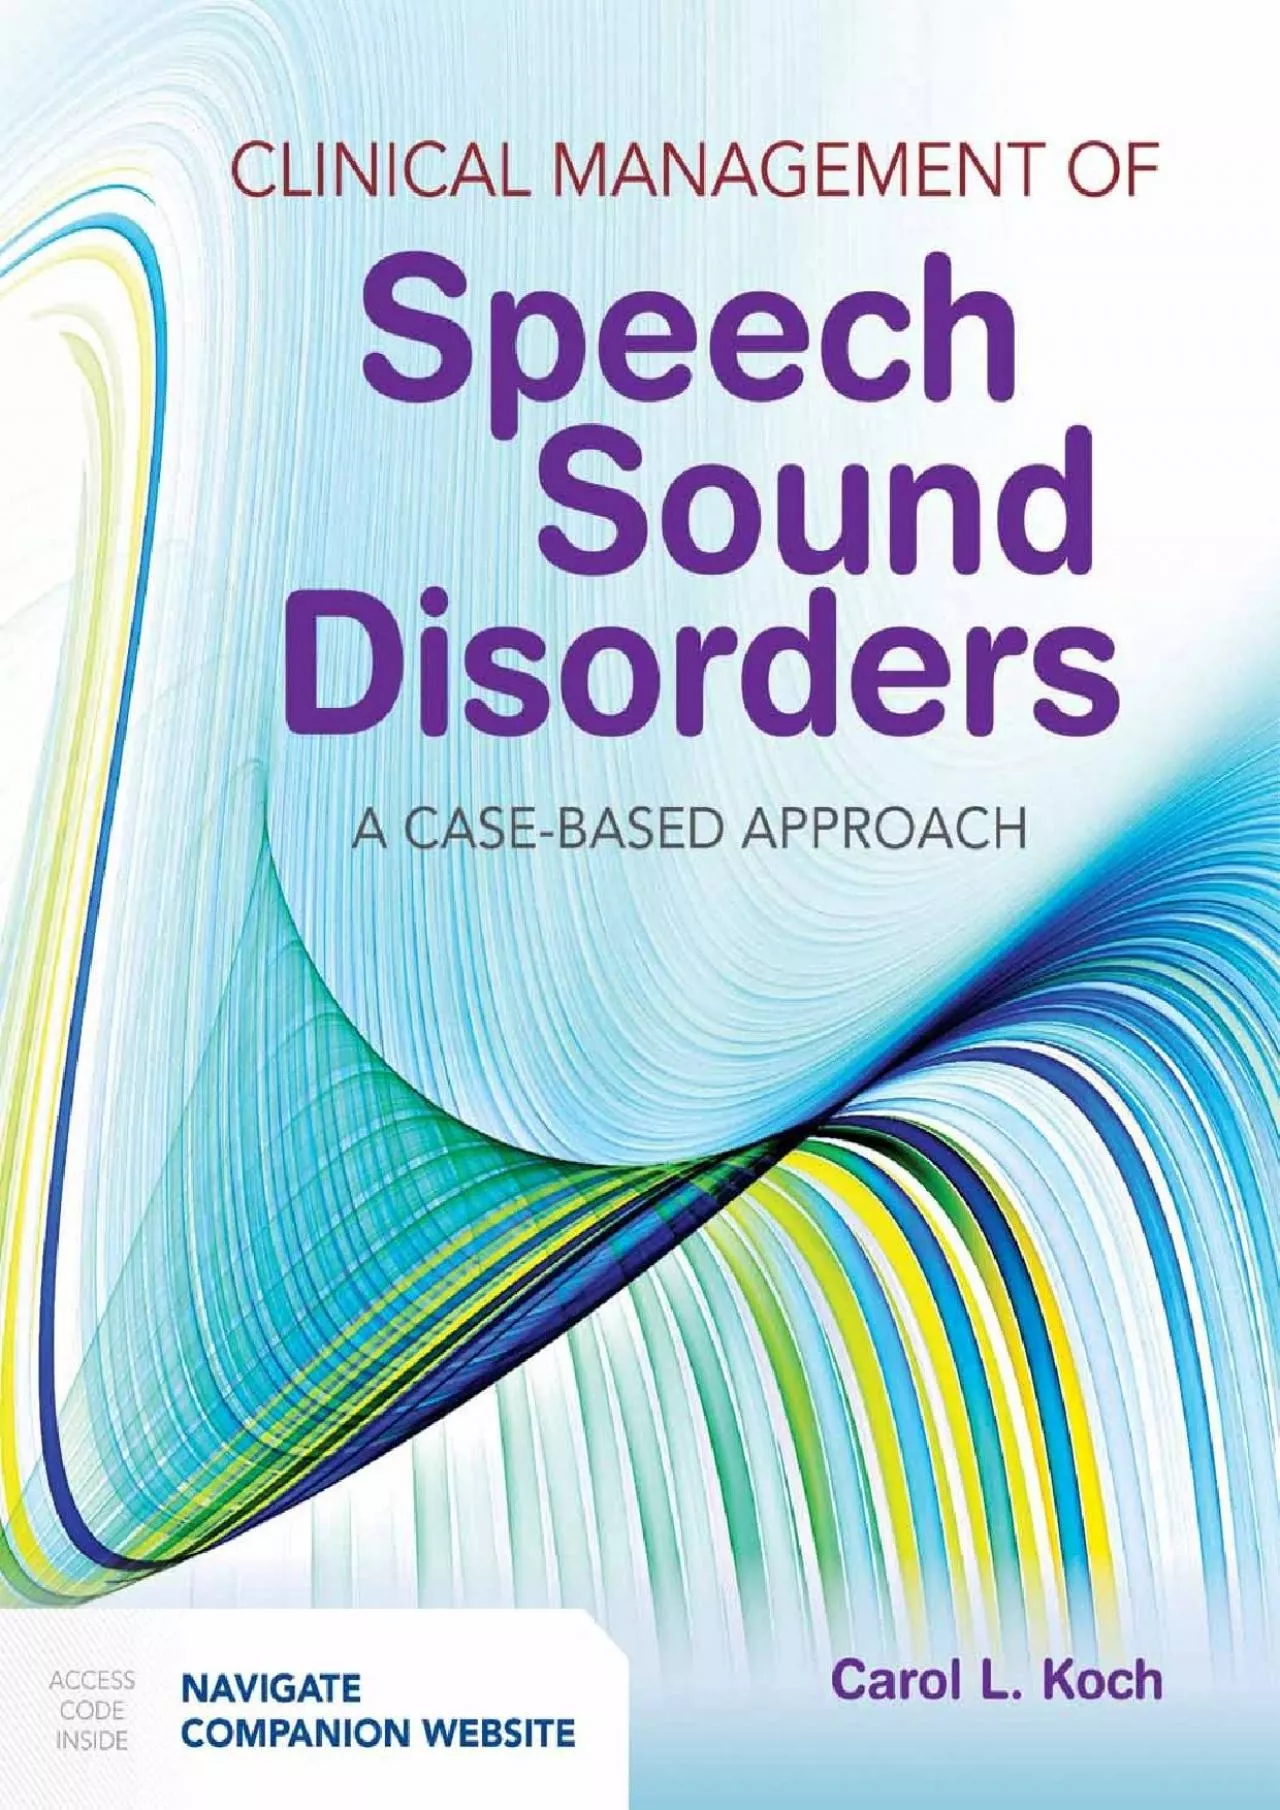 (DOWNLOAD)-Clinical Management of Speech Sound Disorders: A Case-Based Approach: A Case-Based